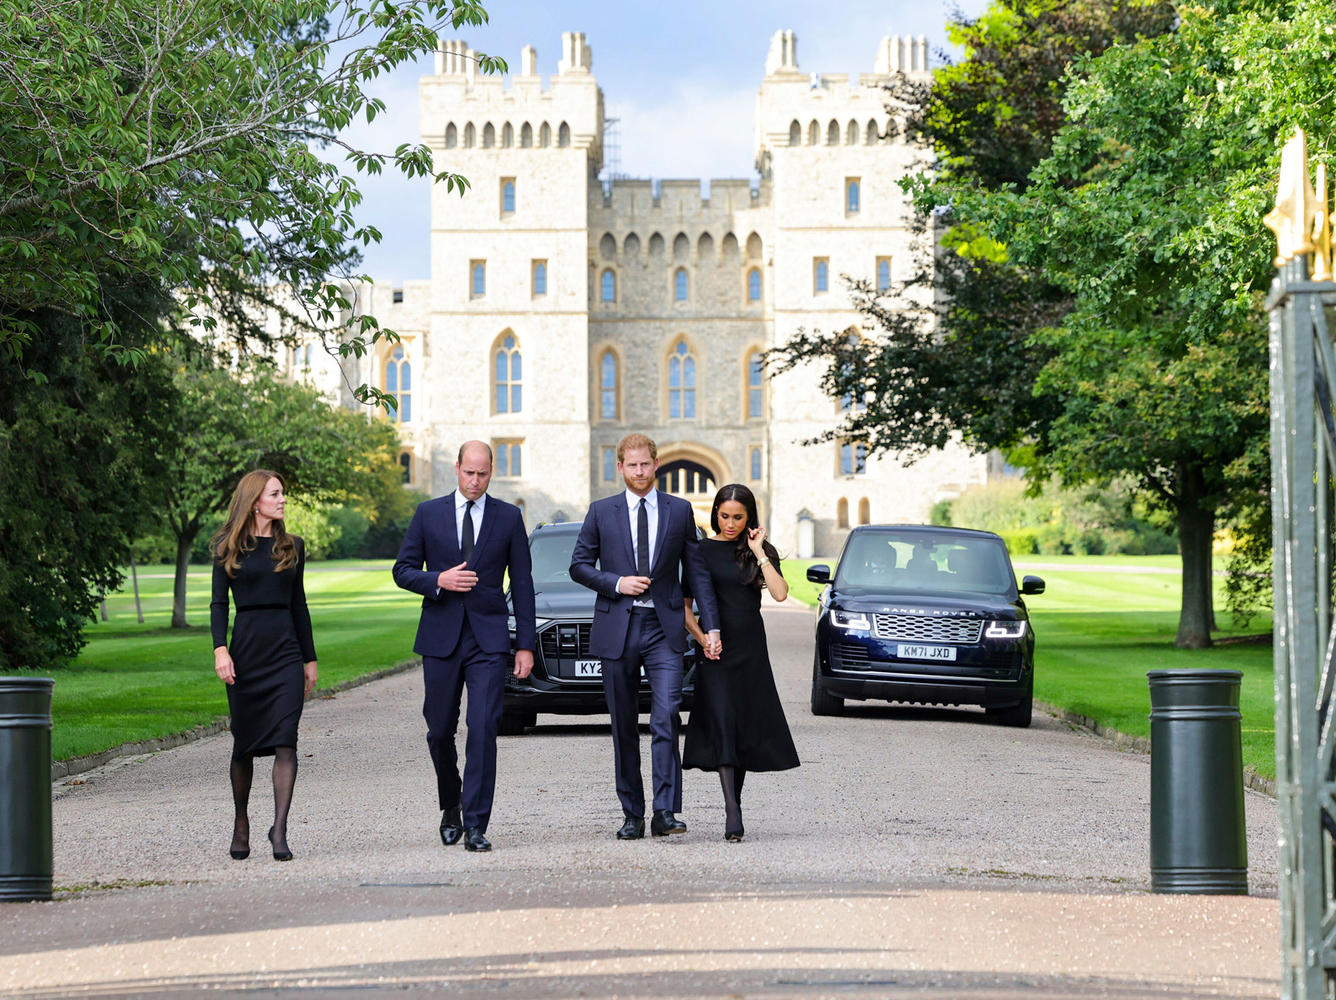 Princes William and Harry arrive at Windsor with their wives: exit footage